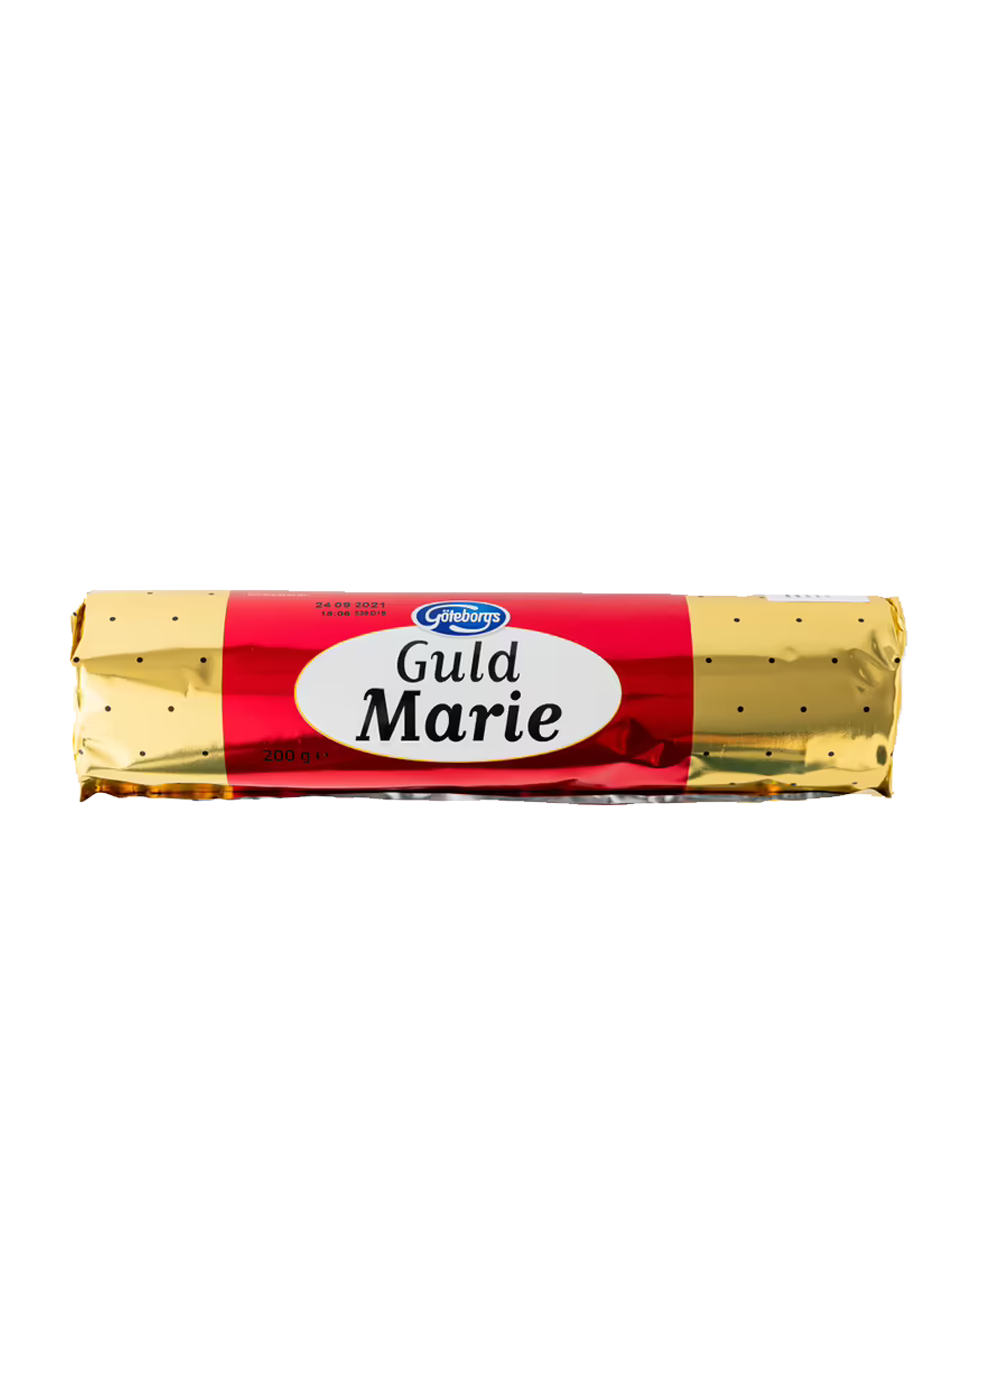 Goteborgs Kex Guld Marie Classic Shortbread Biscuits 200g